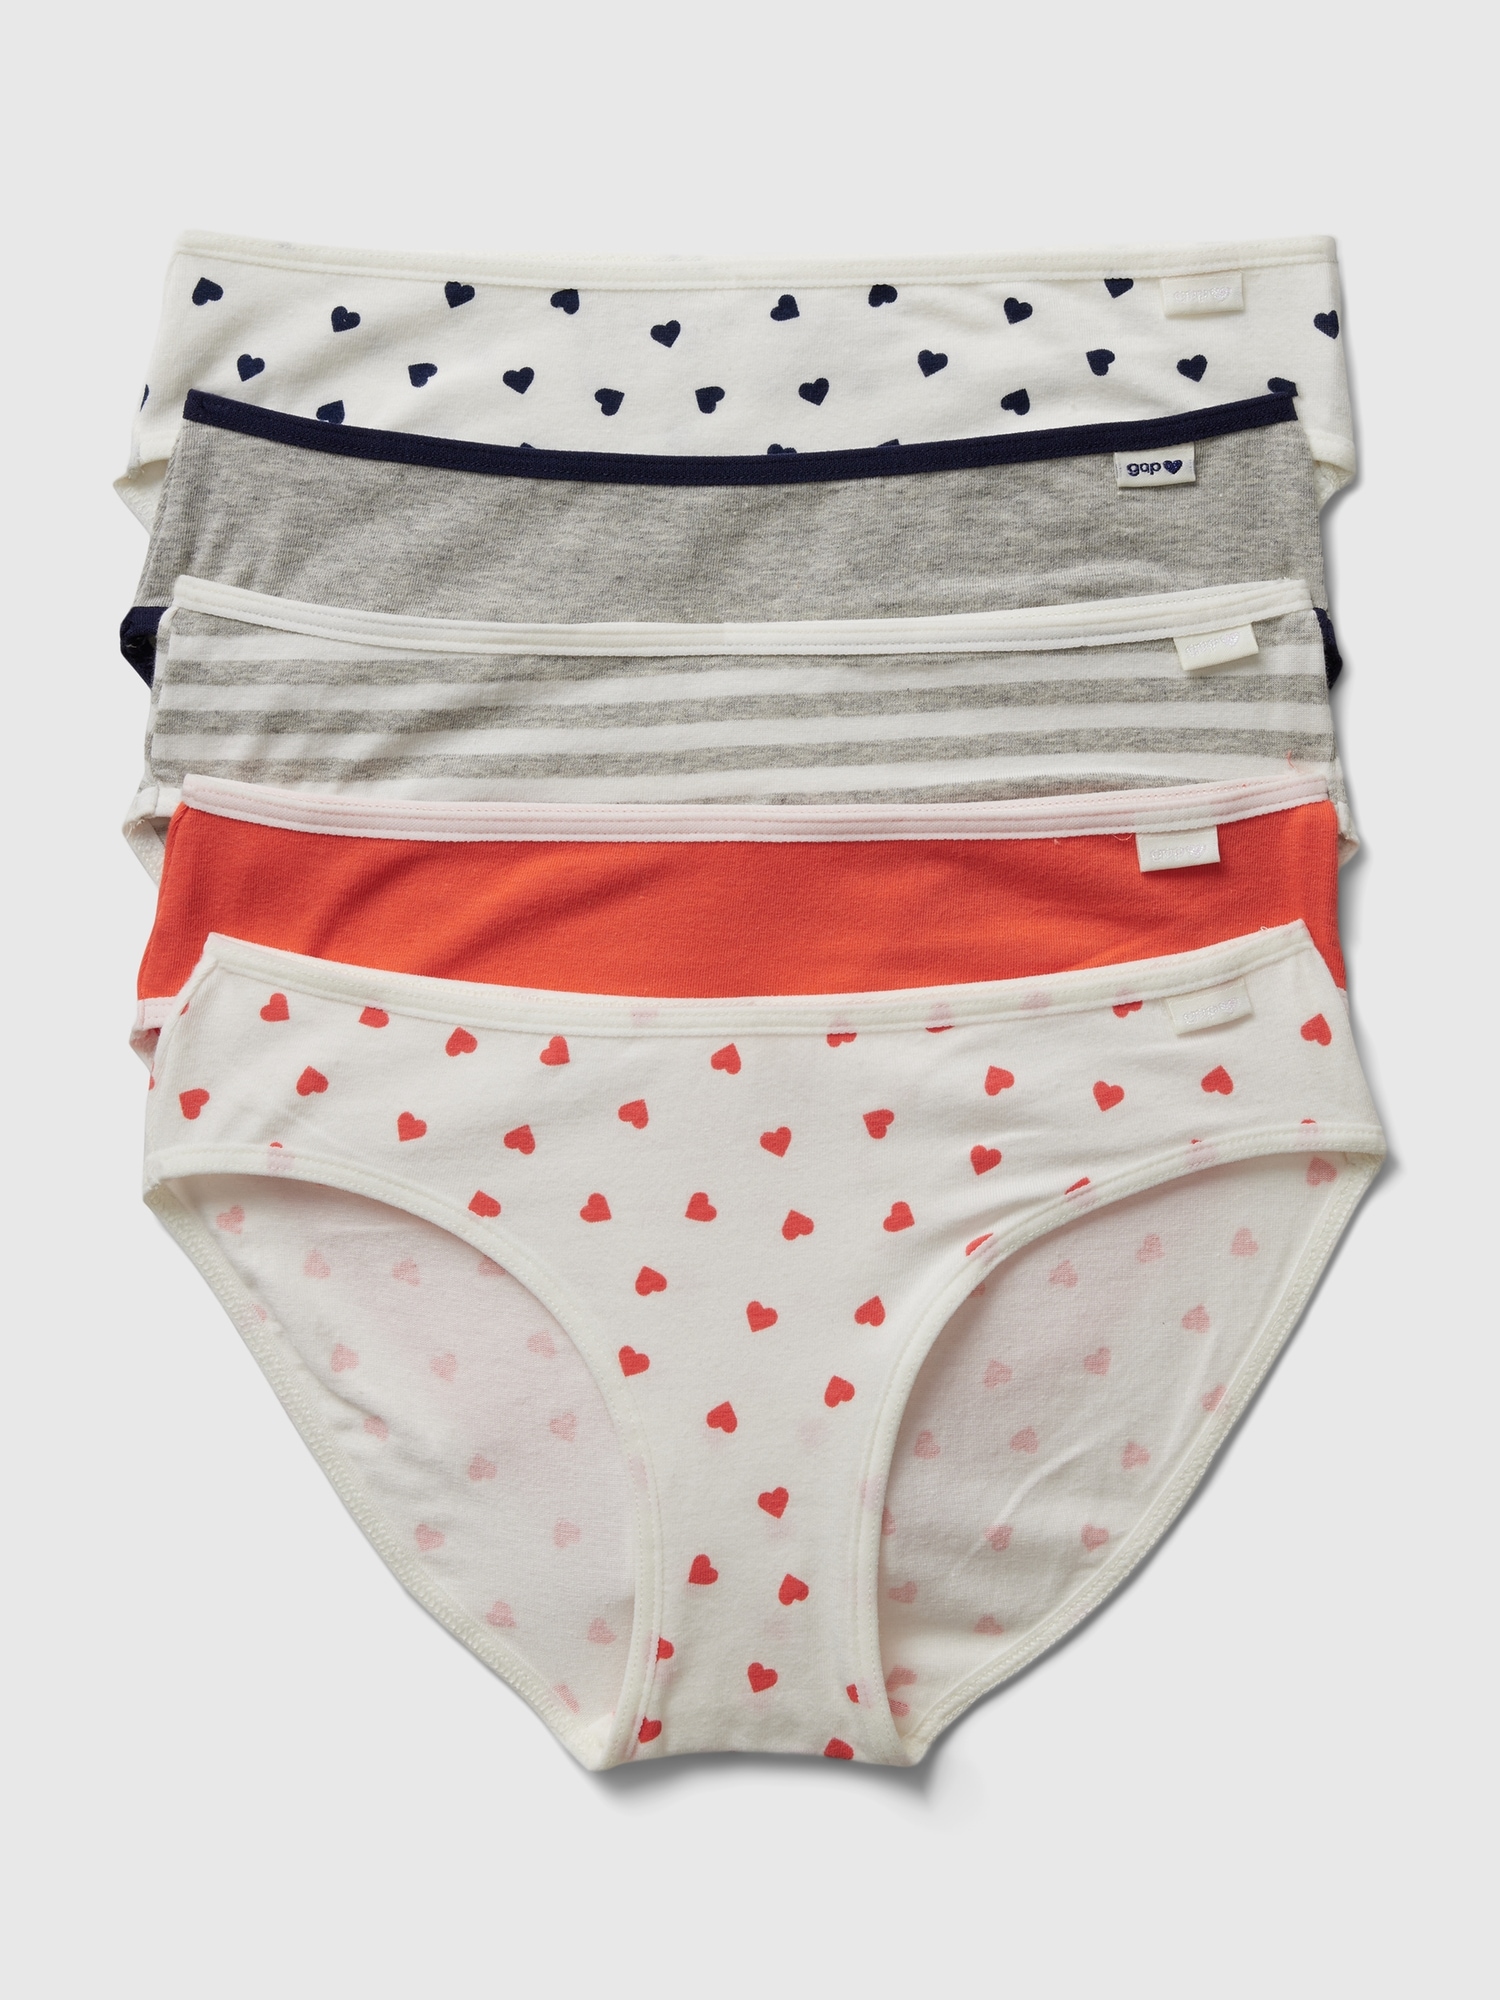 Teen White Cotton Panties,cute Print Hipster Underwear For Girls